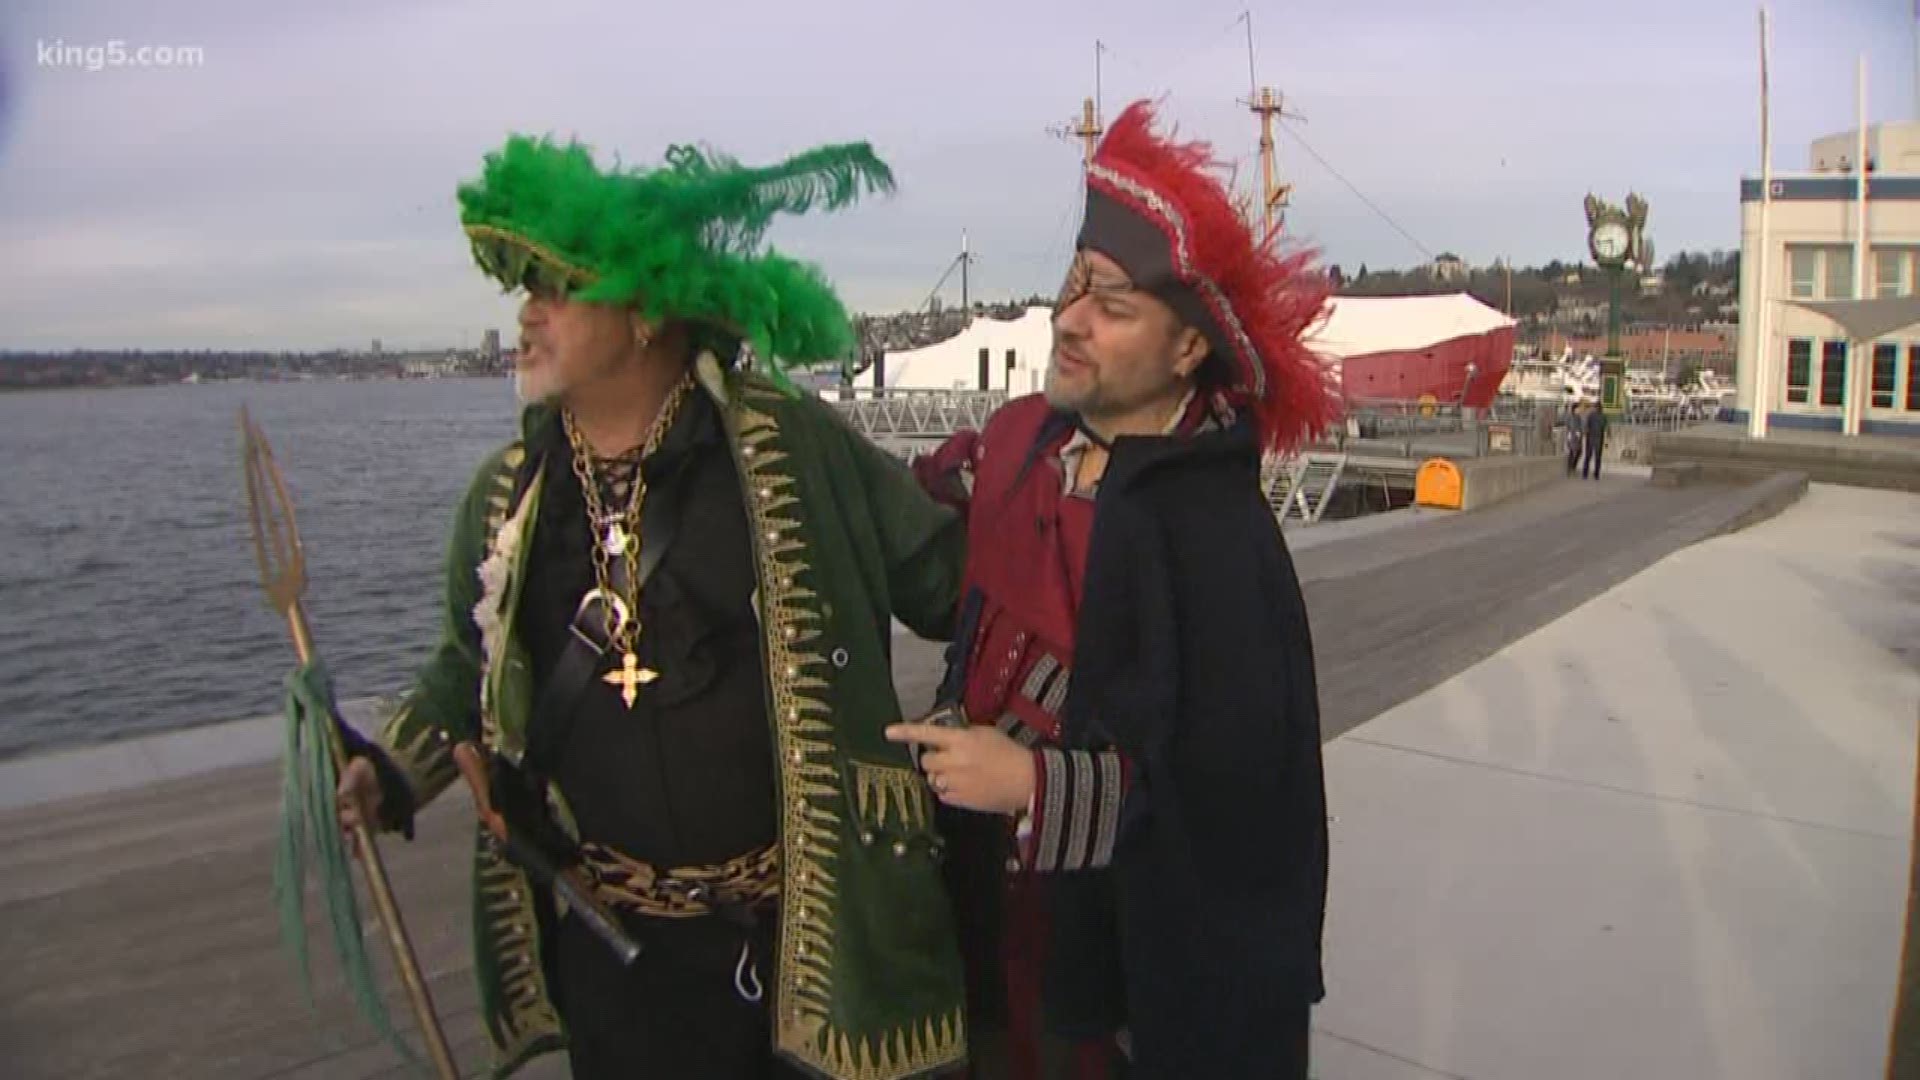 Seafair Pirates help Seattle celebrate St. Patrick's Day. KING 5 photojournalist Dustin Gagne shares the festivities.